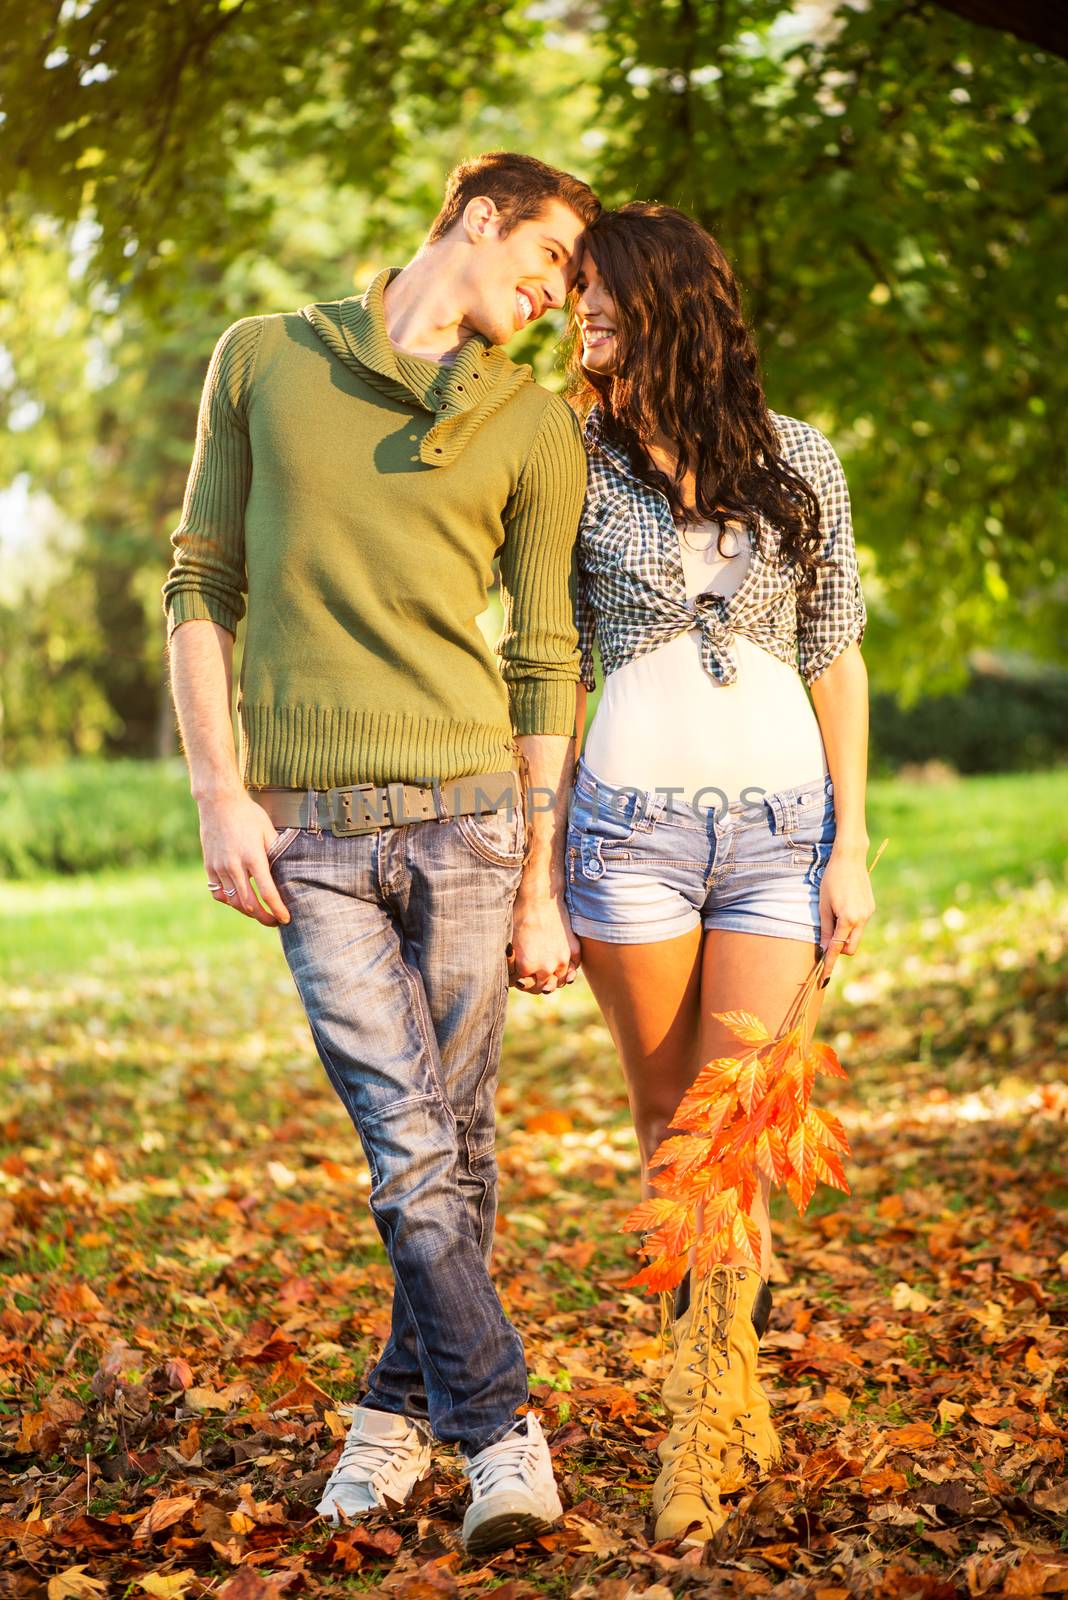 Young heterosexual couple in the park, walking on fallen leaves, holding hands and looking with a smile at each other.